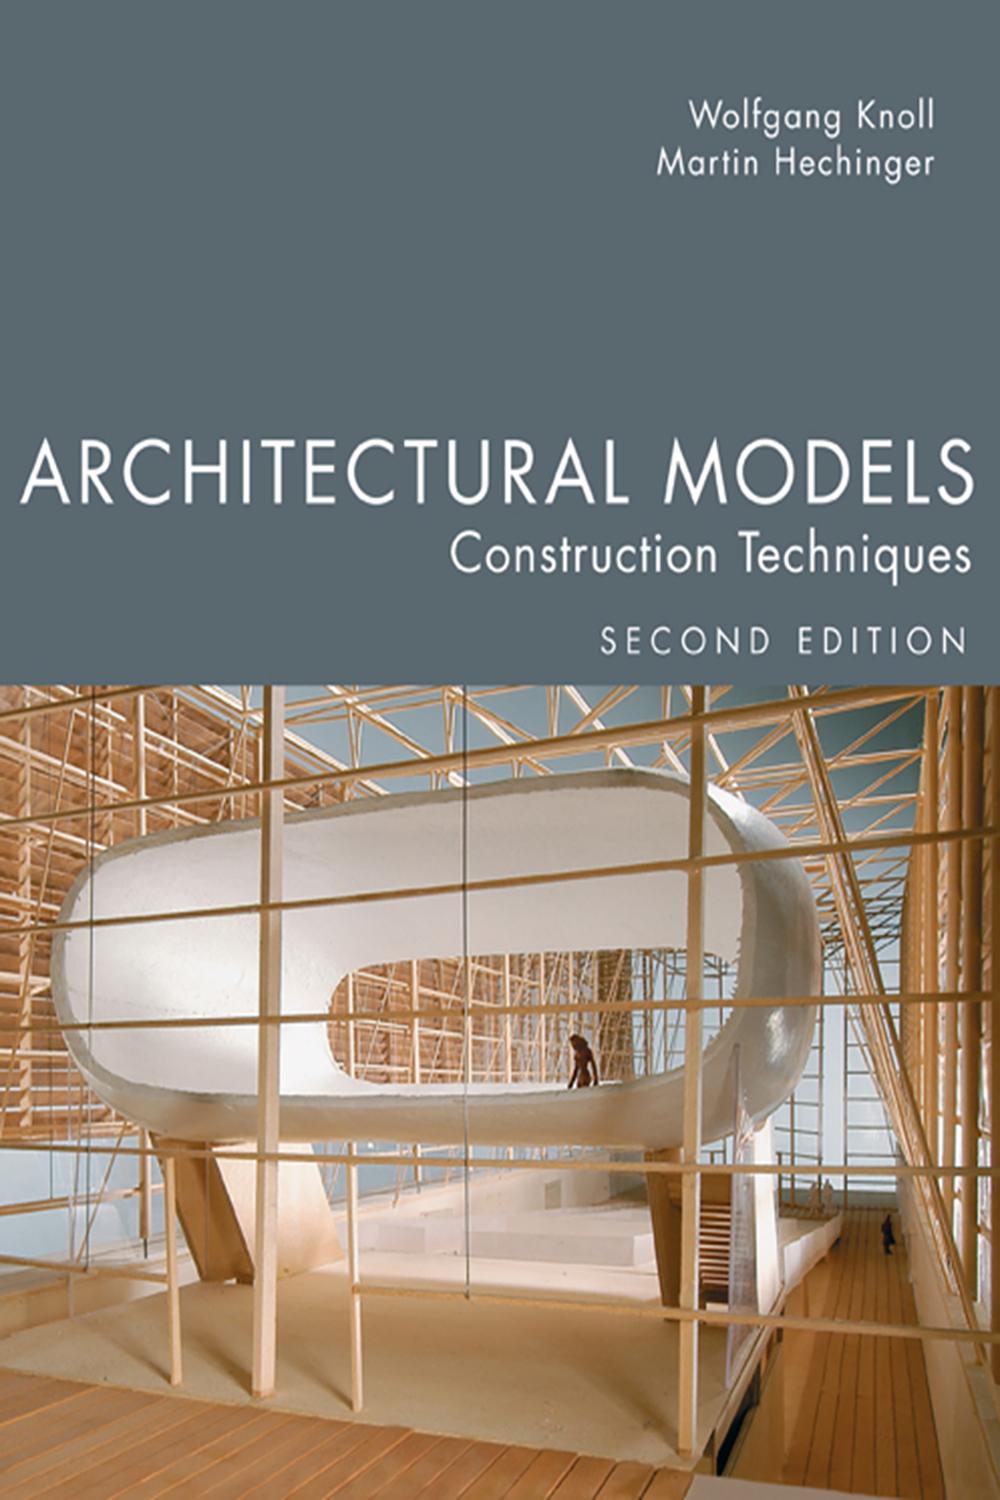 Architectural Models, Second Edition - Wolfgang Knoll, Martin Hechinger